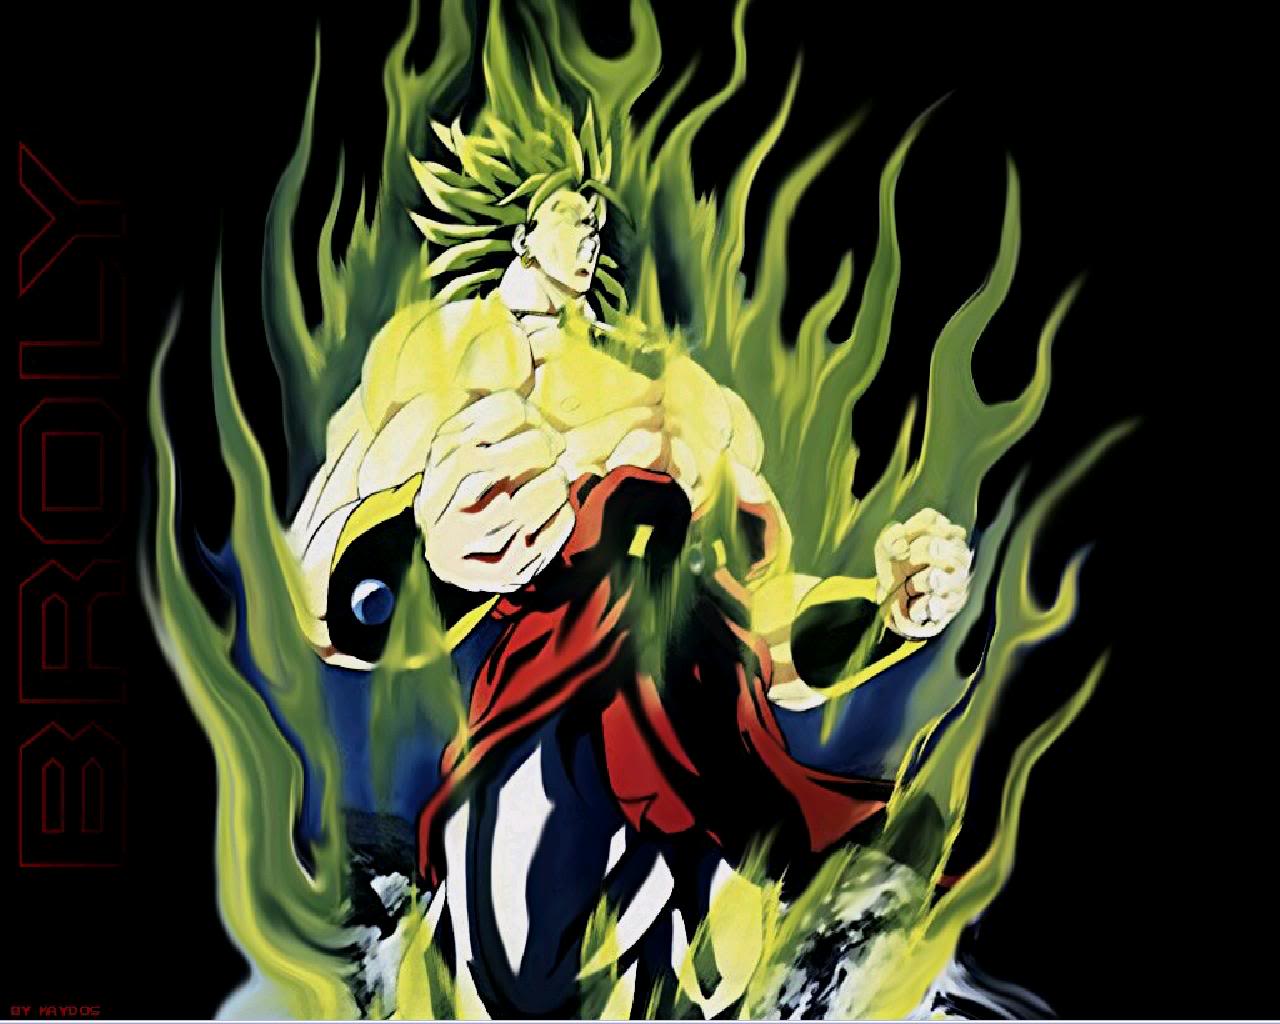 Dbz Broly Wallpaper 64+ images